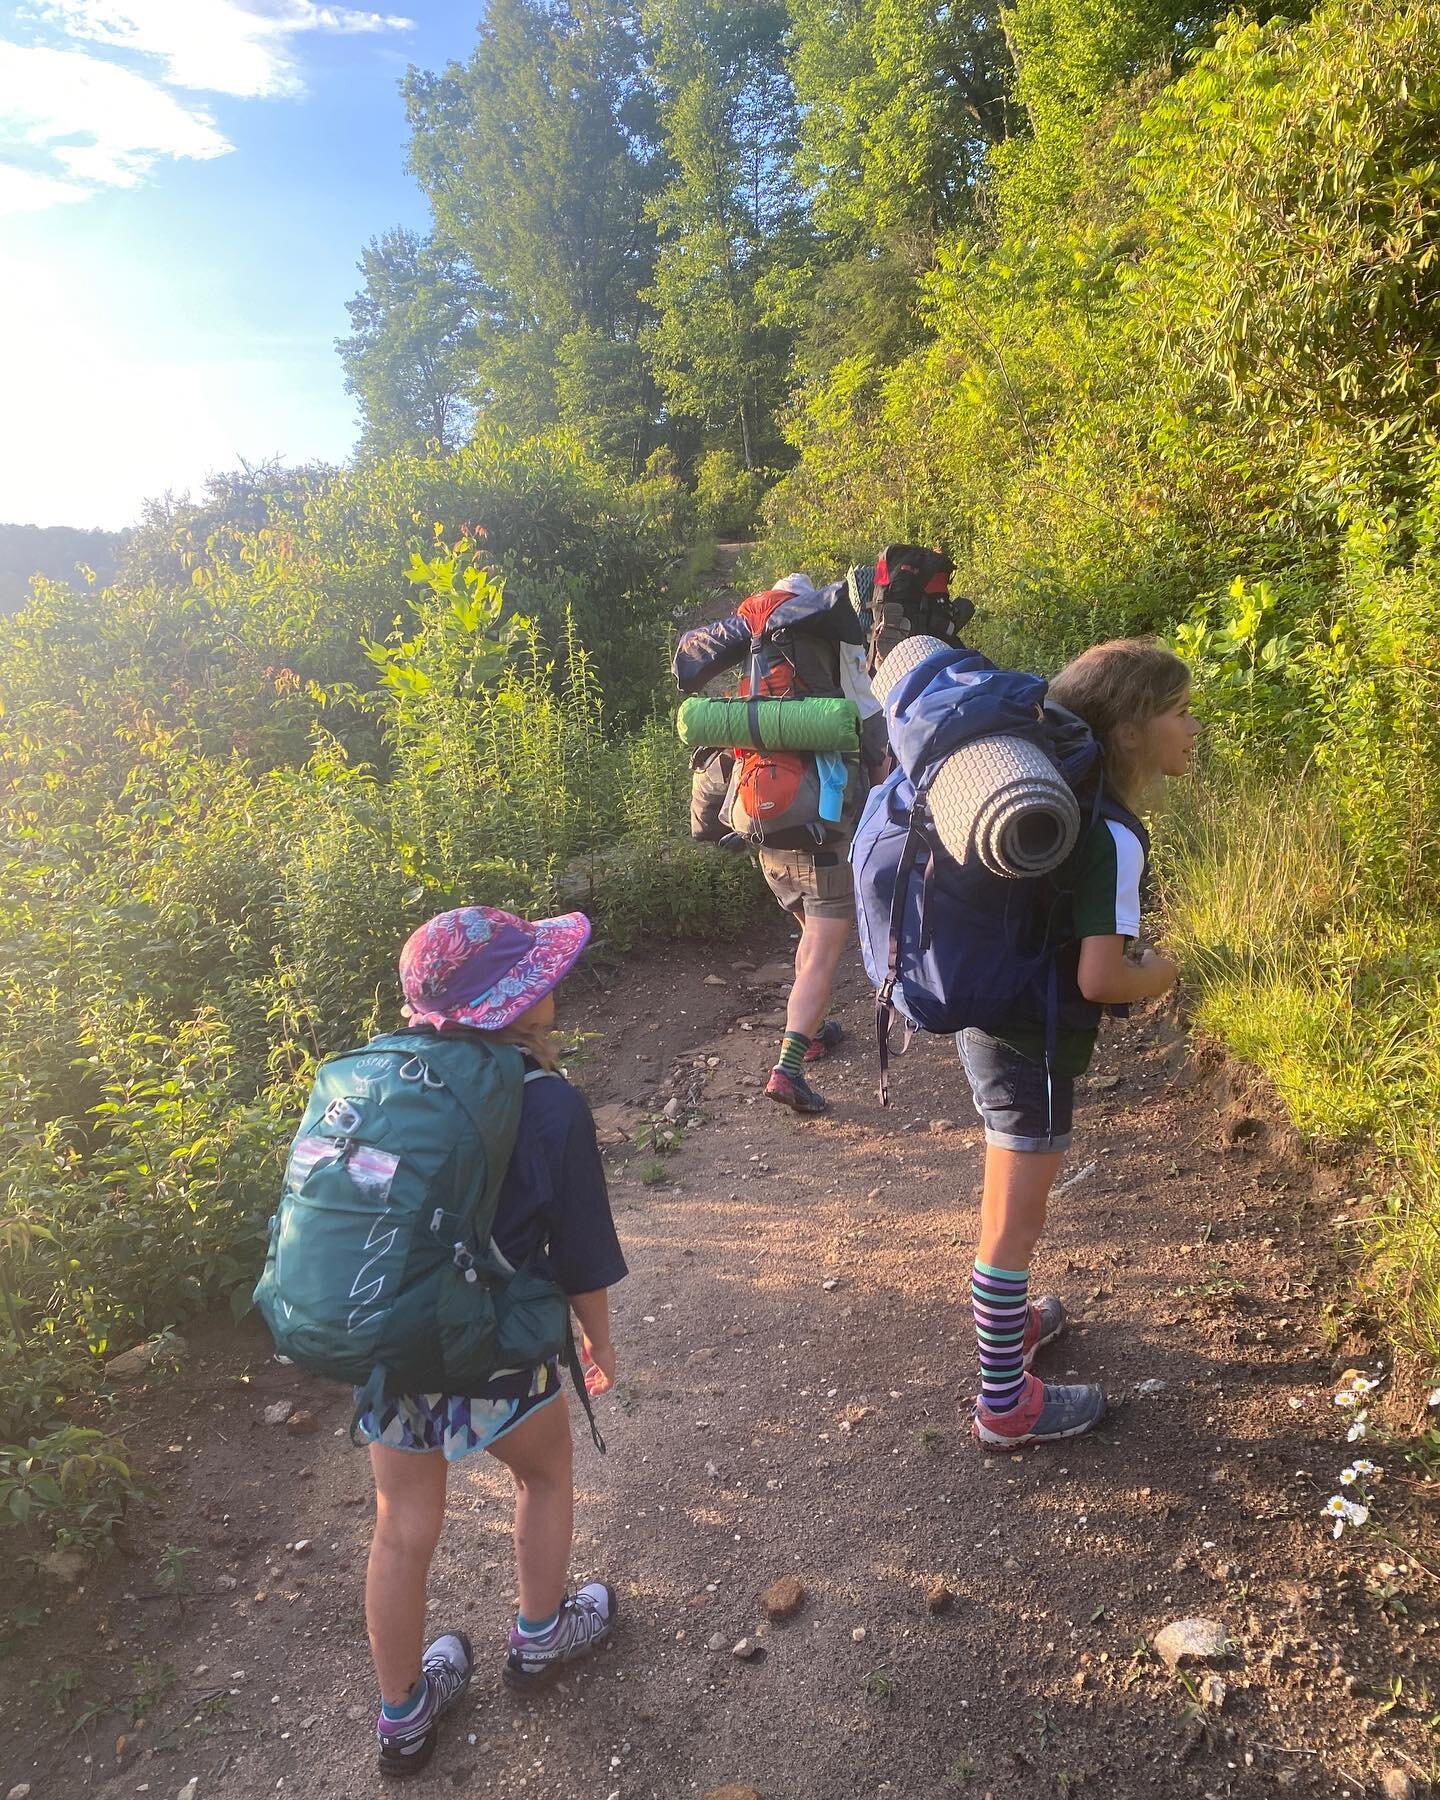 Photo drop from the weekend at Panthertown. Backpacked with Bean and her girl pals. We ate lots of dried fruit, nuts, salty chips and crackers, oatmeal and chocolate. To make it easier (and lighter), had freeze dried meals for dinner.
Pictures are th